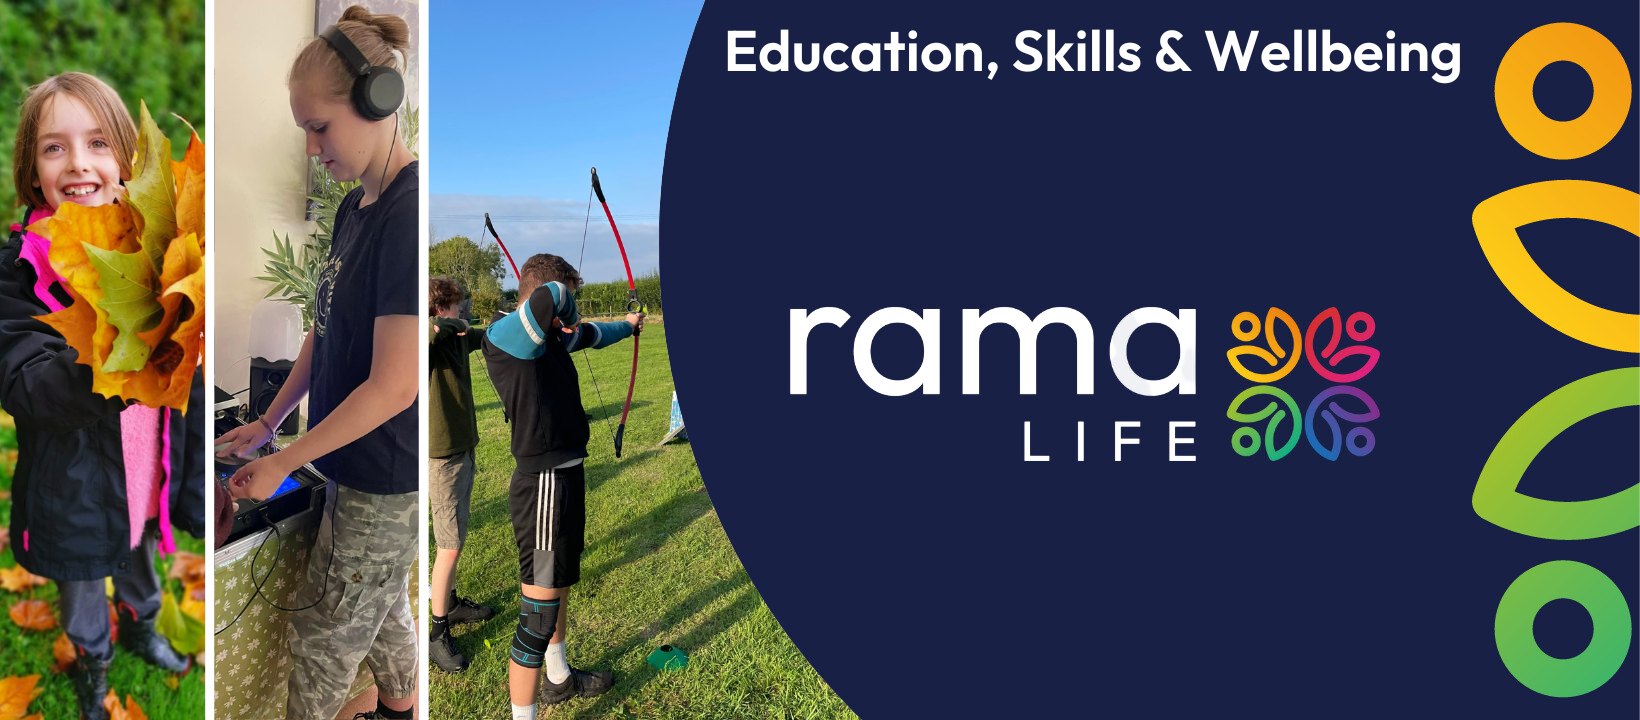 Rama LIfe Education Skills and Wellbeing Cover